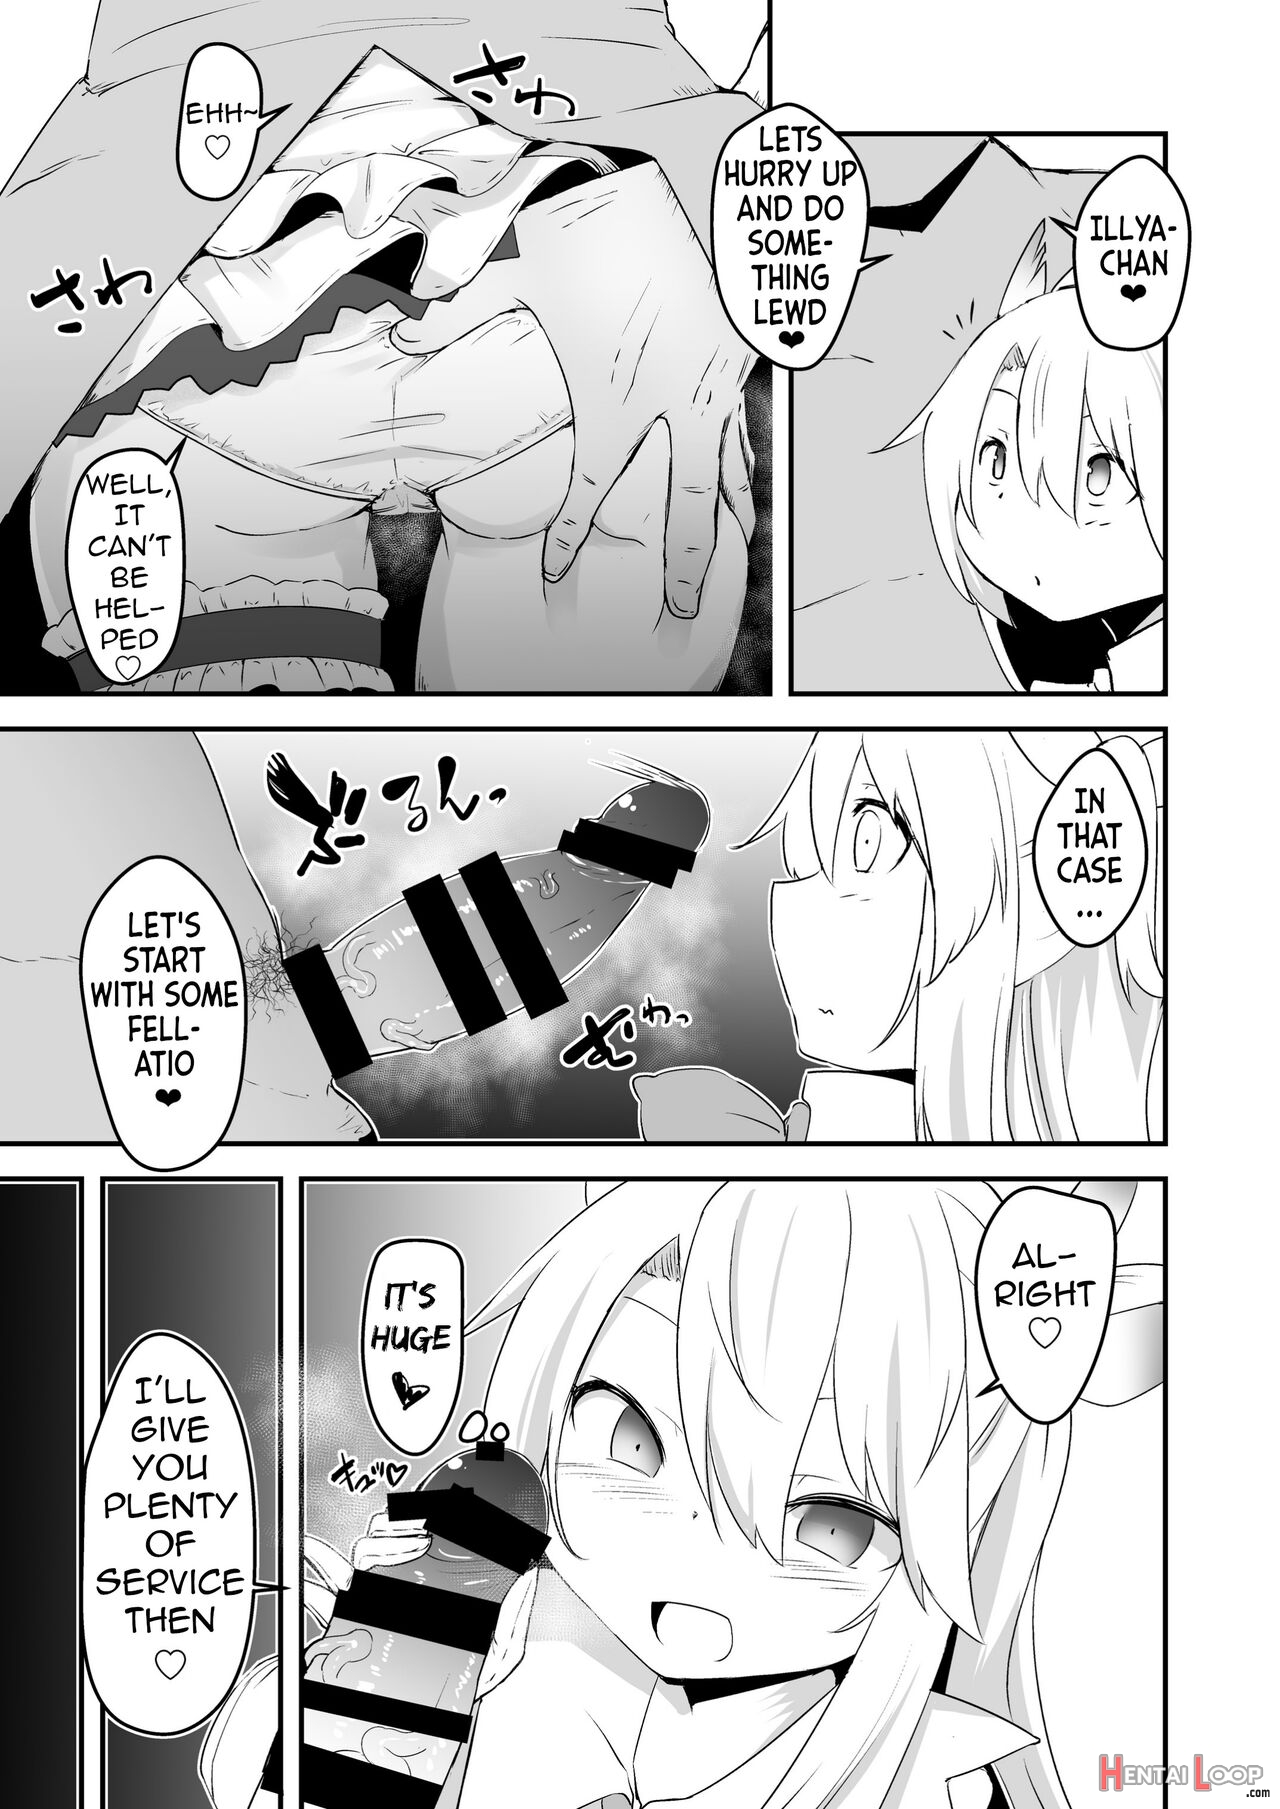 Doing Lewd Things With Oji-san page 4